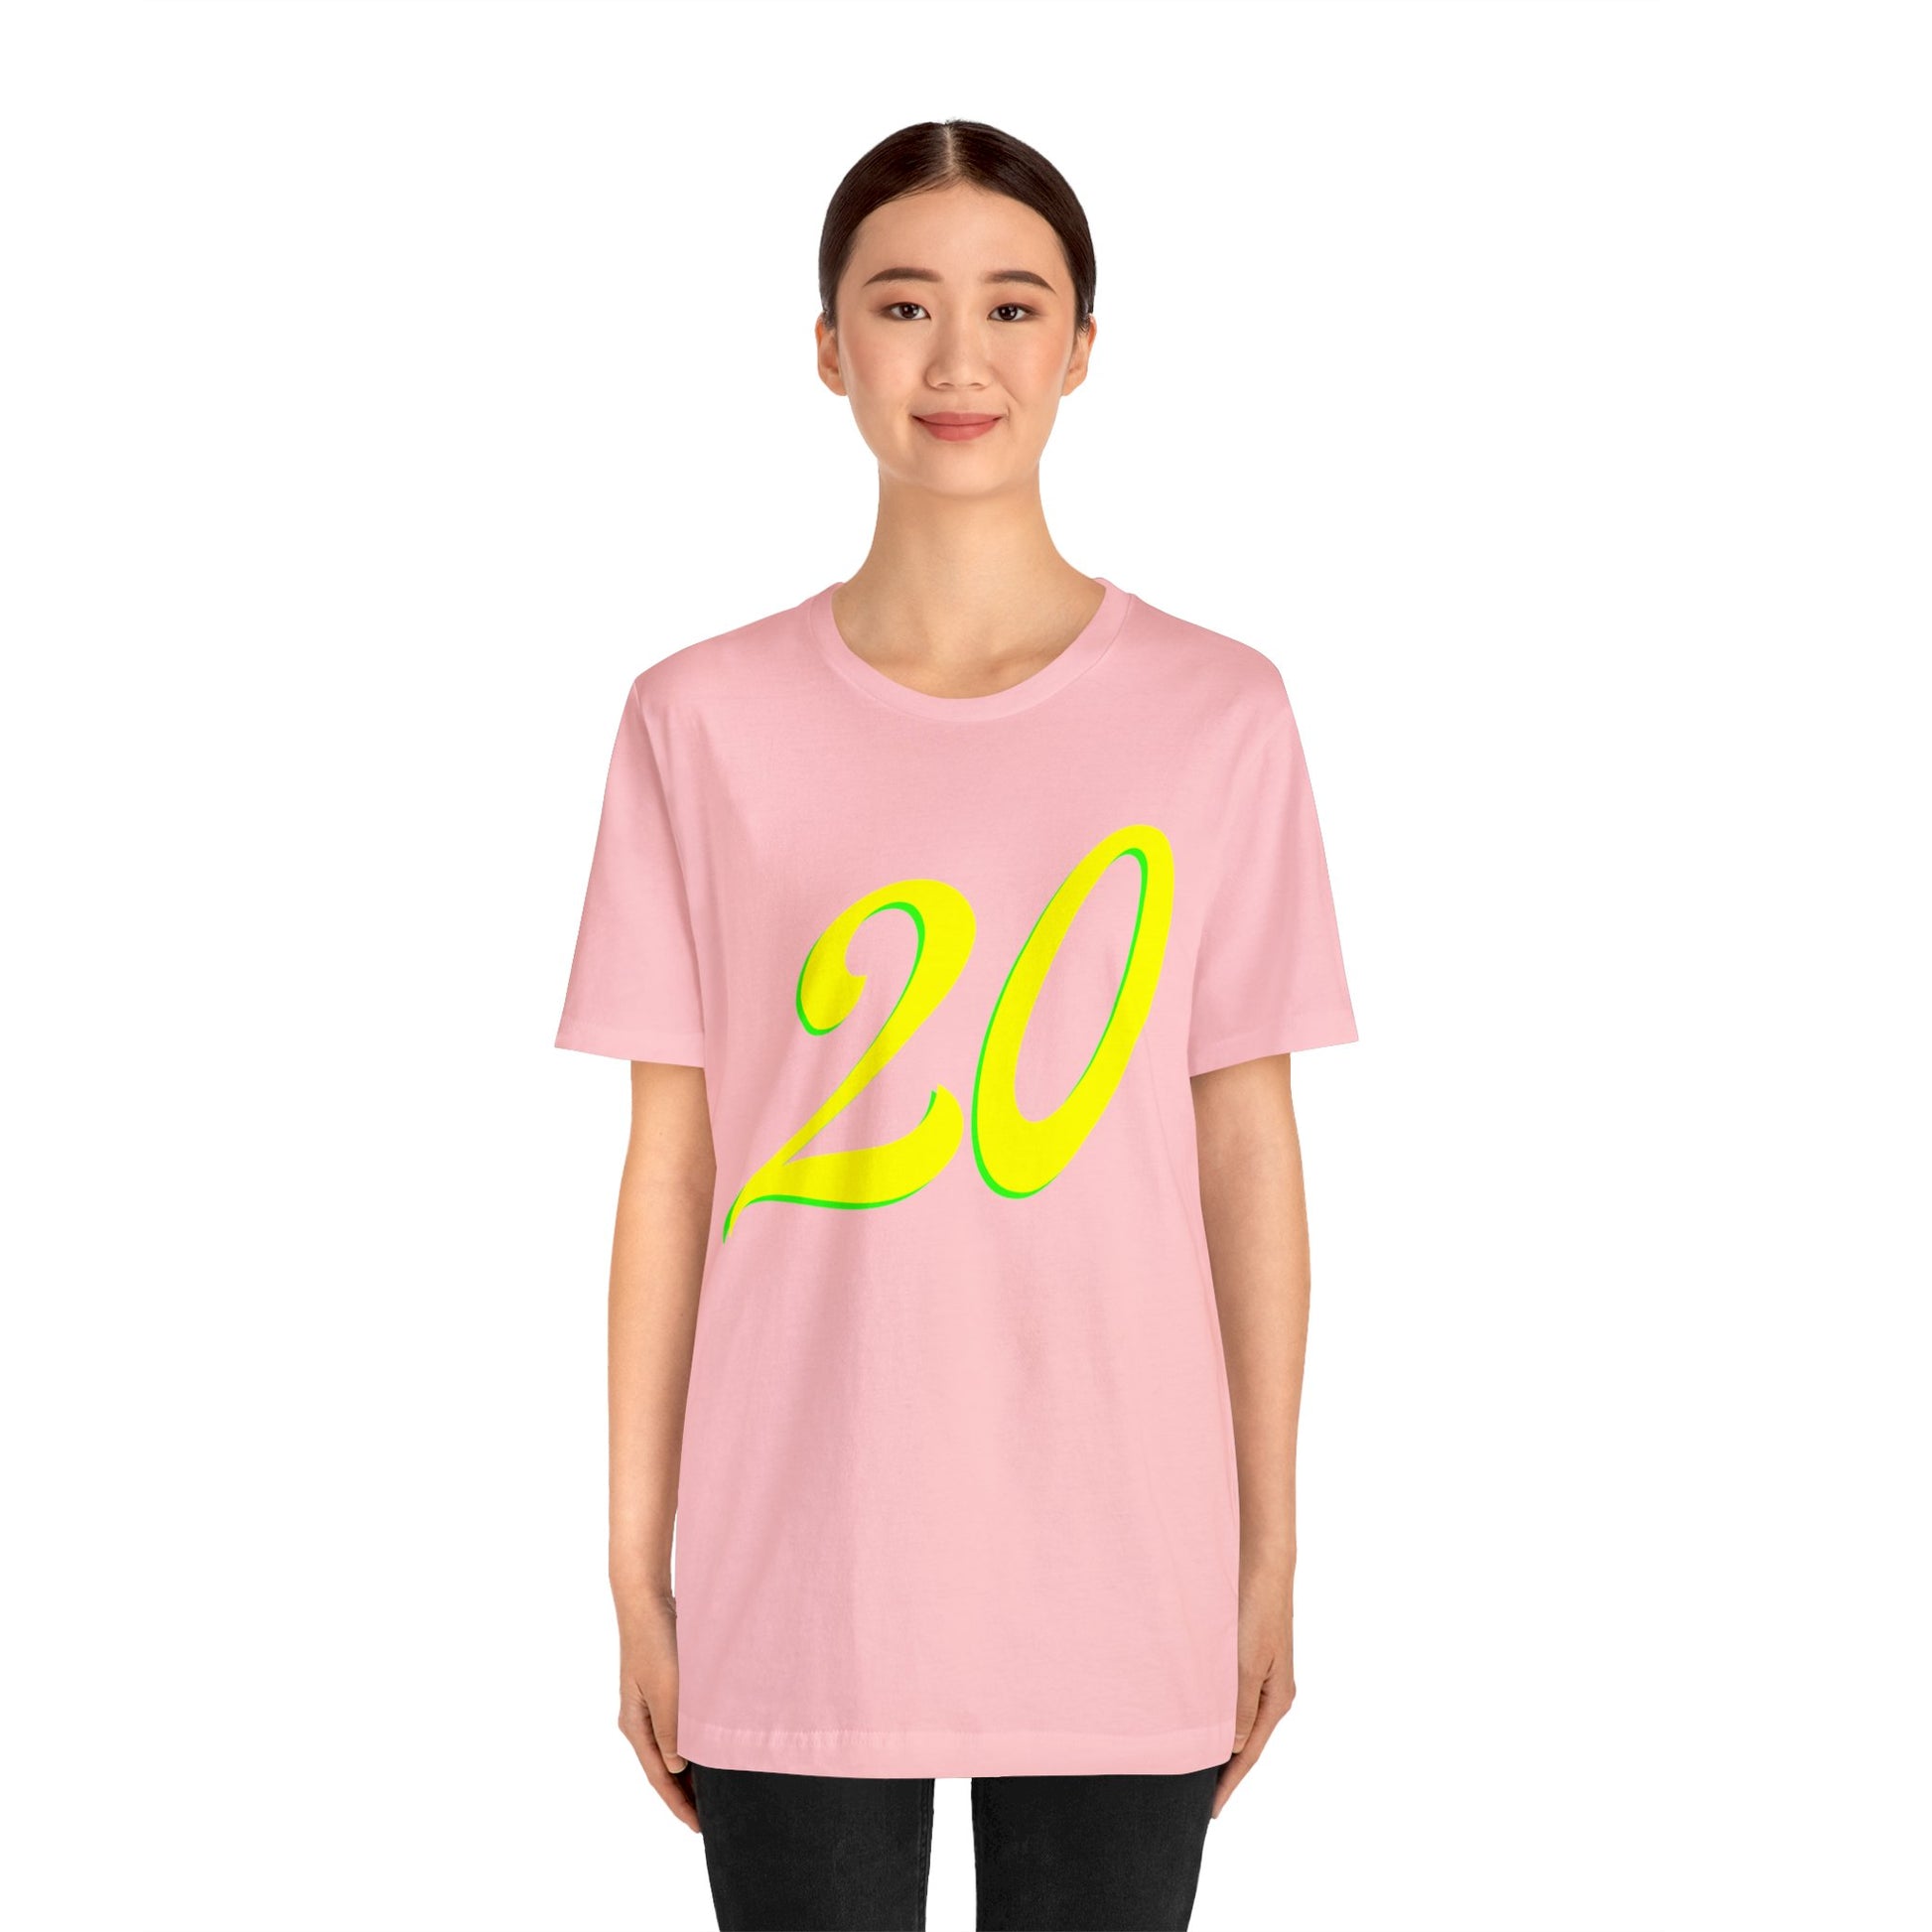 Number 20 Design - Soft Cotton Tee for birthdays and celebrations, Gift for friends and family, Multiple Options by clothezy.com in Asphalt Size Medium - Buy Now